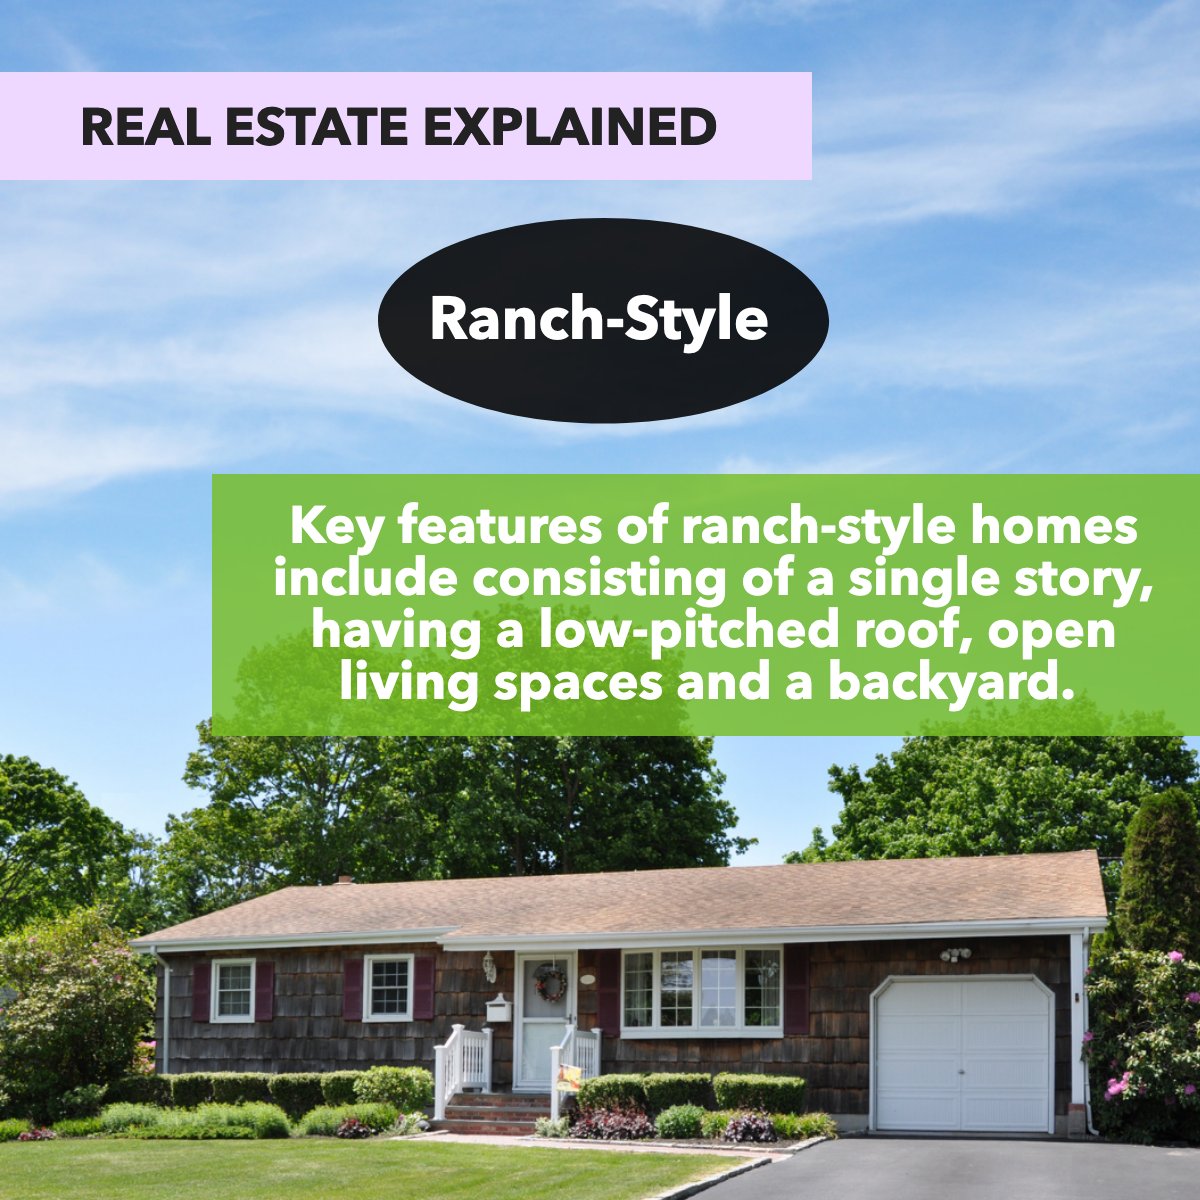 Ranch-style houses are now the most commonly searched-for style of home in the United States. 🏘️ #ranchostyle #ranchhousestyle #ranchstylehomes #RacingRealEstateAgent #BarrettRealEstate #StoneTreeRealEstateTeam #maricopaazrealestate #racingagent